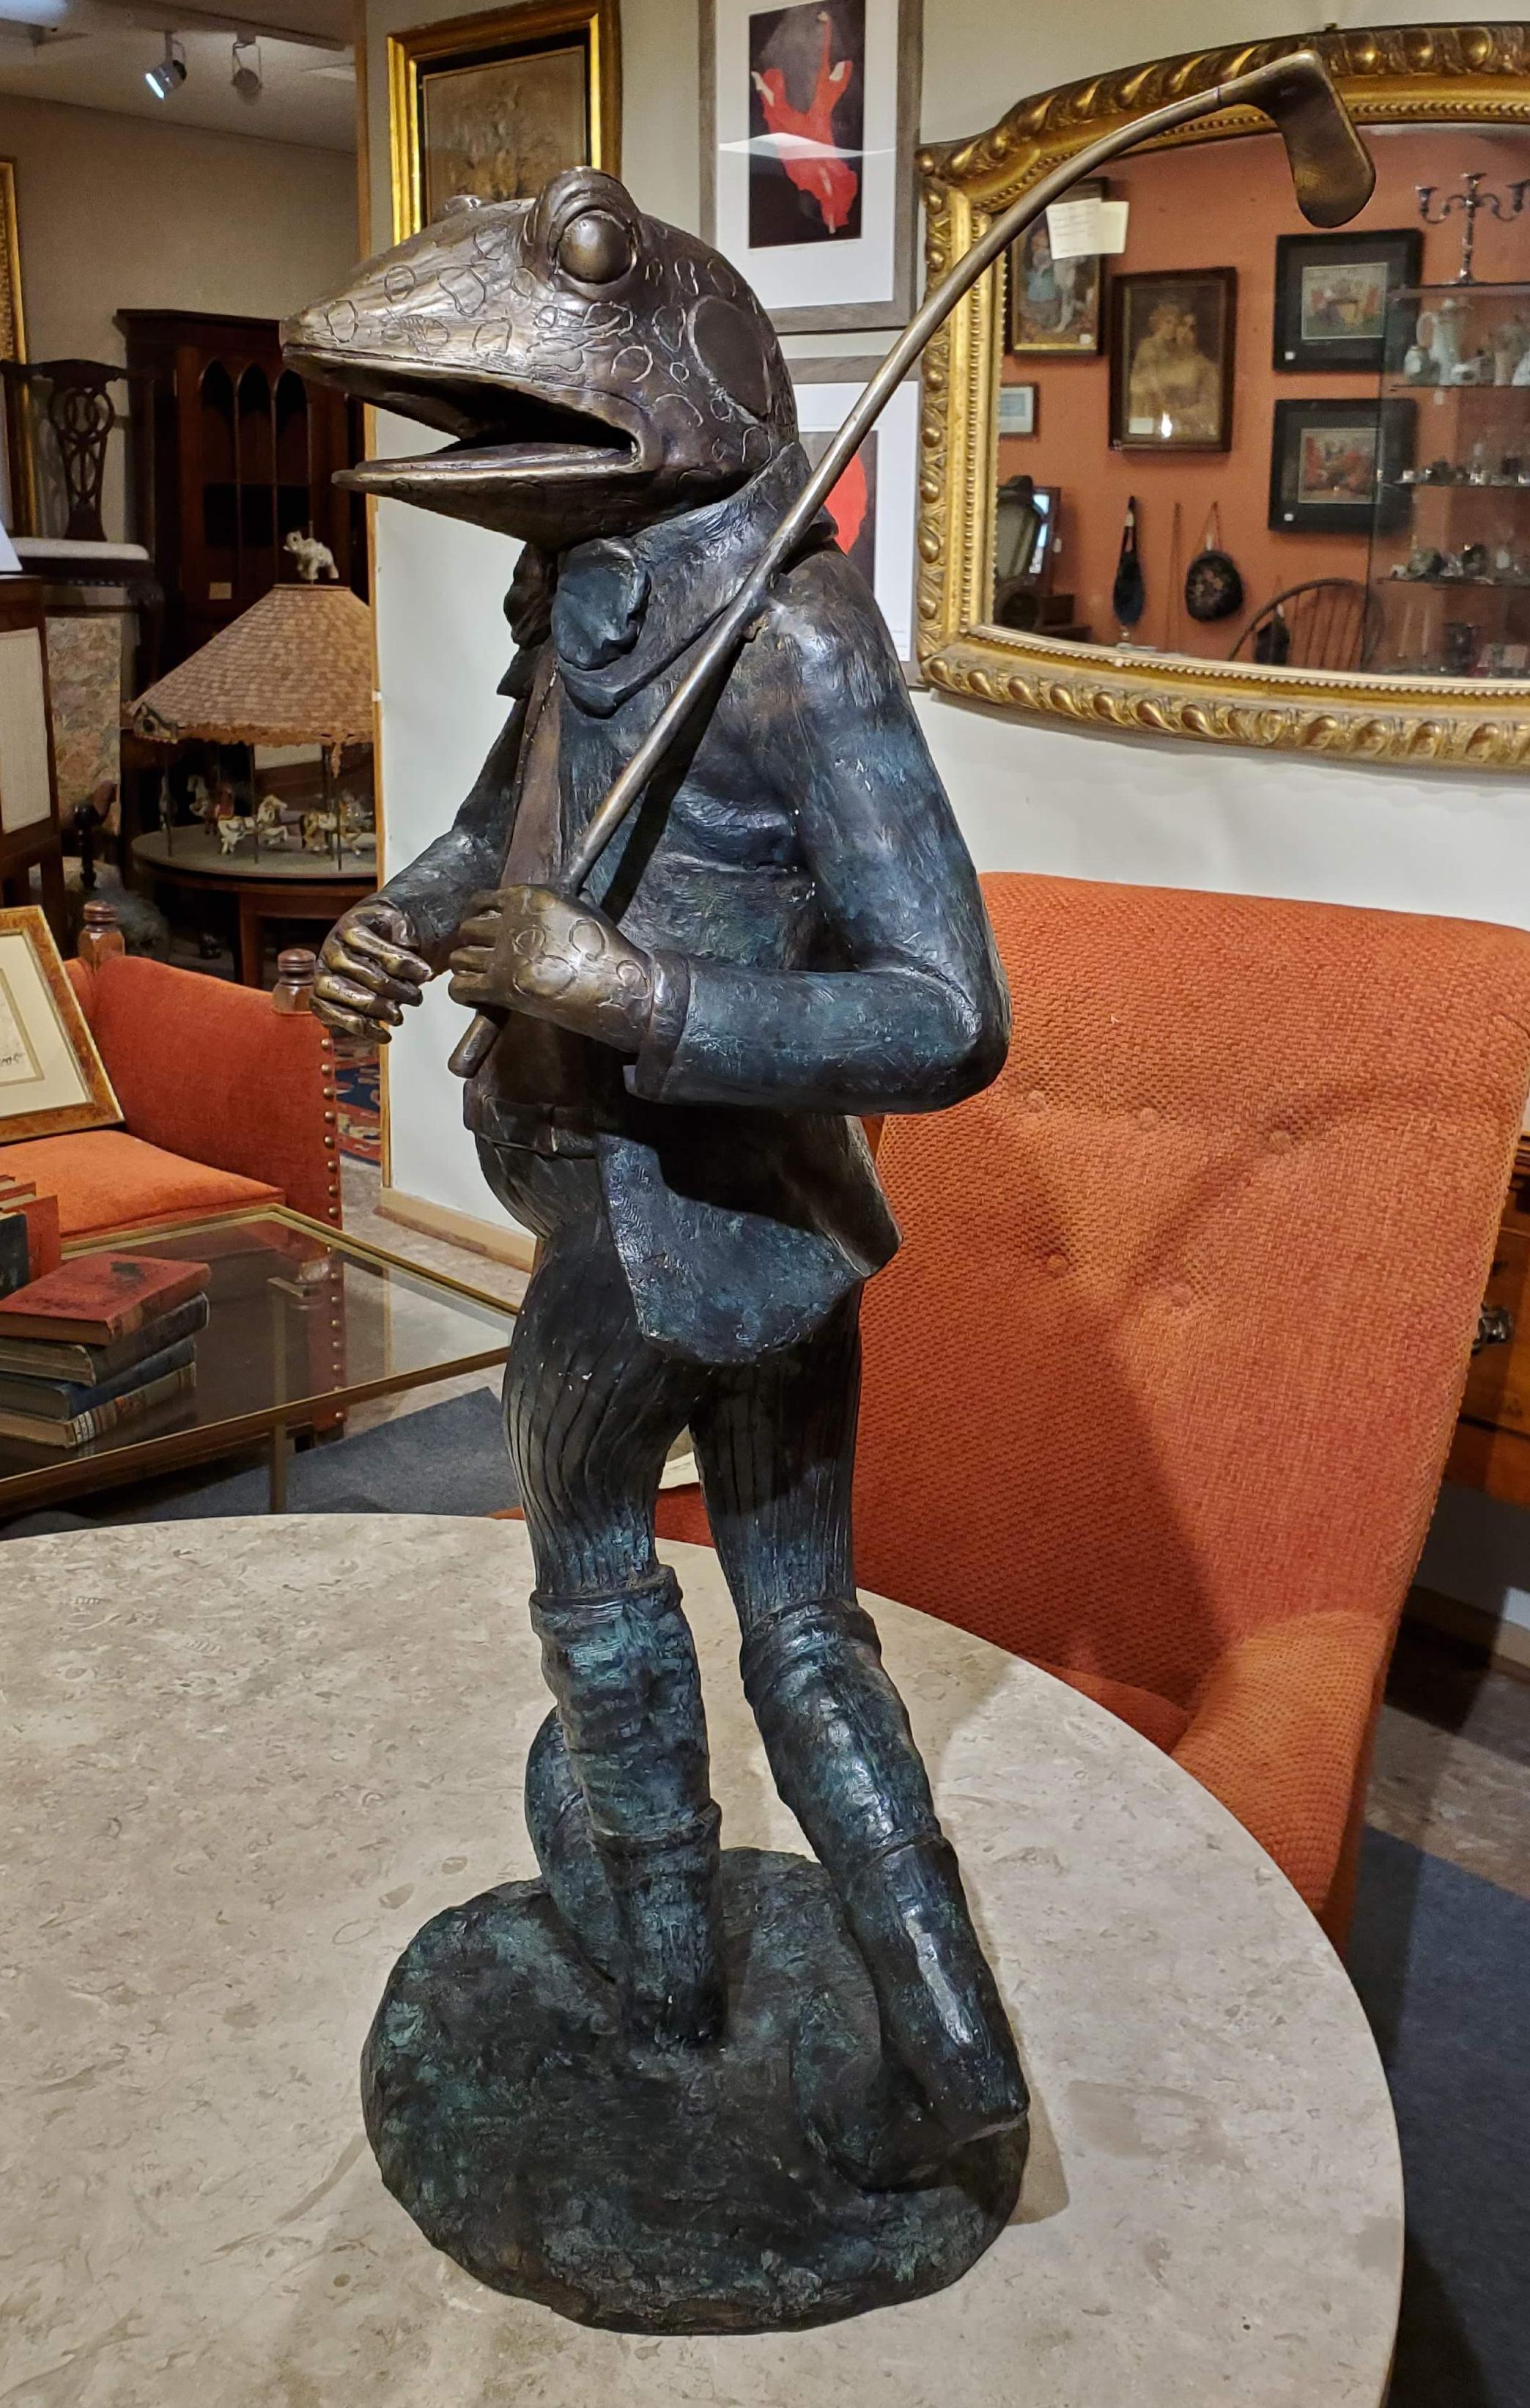 Large 20th century bronze sculpture of frog dressed in 19th century Golf outfit 
Add a bit of whimsy to your home with this good sir. The large bronze sculpture is wonderfully detailed and will make you smile daily. Perfect any lover of amphibians